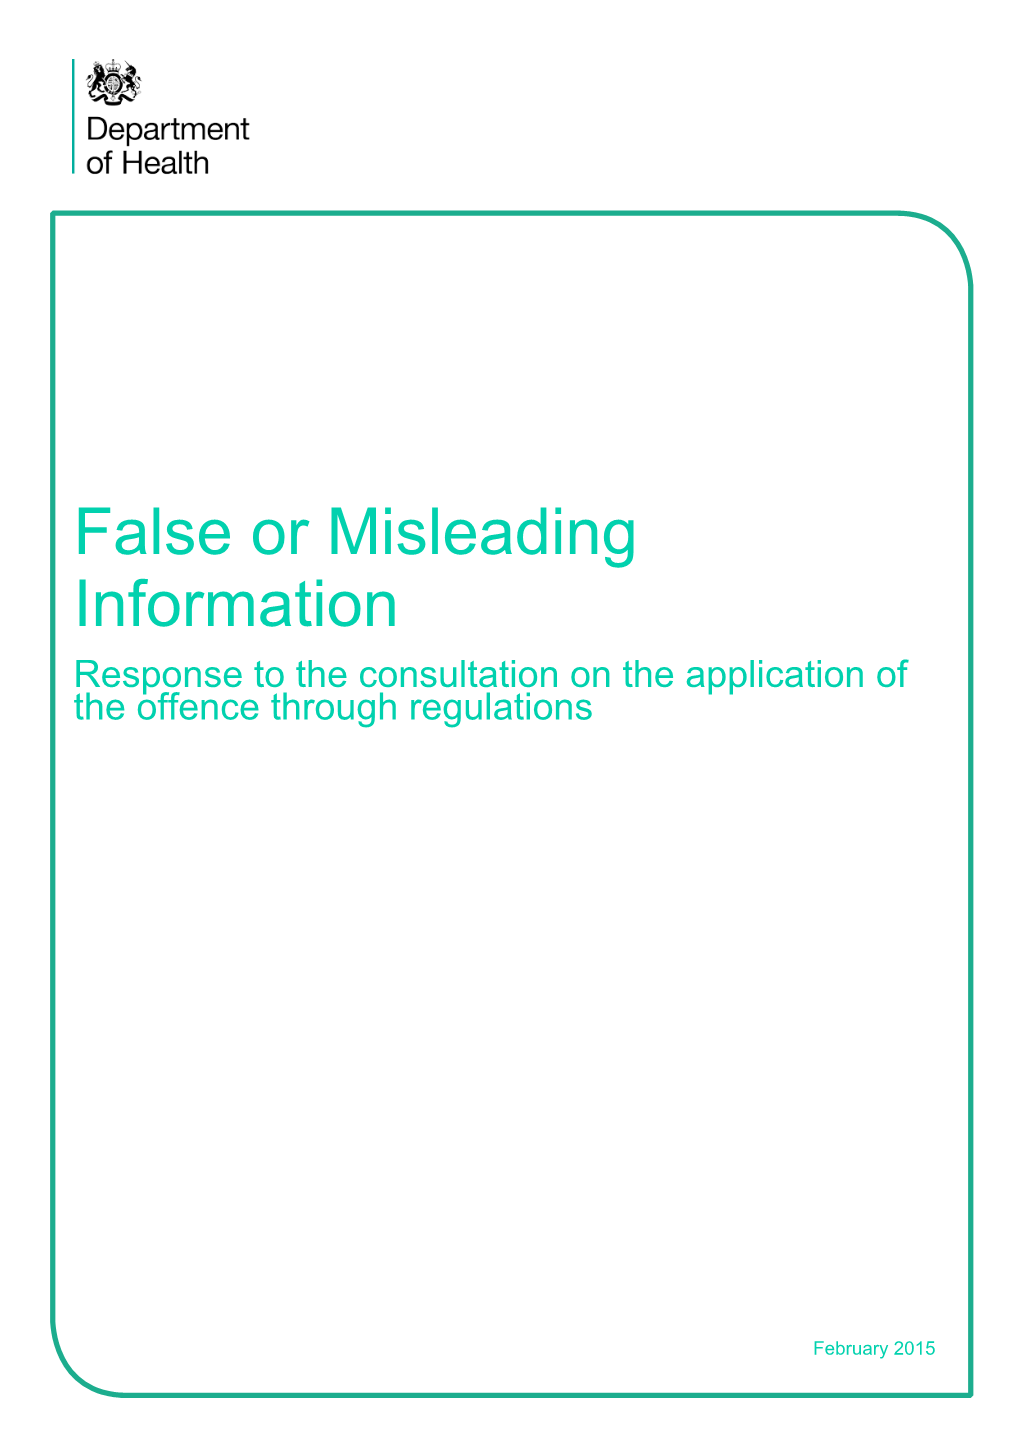 False Or Misleading Information: Response to the Consultation on the Application of the Offence Through Regulations